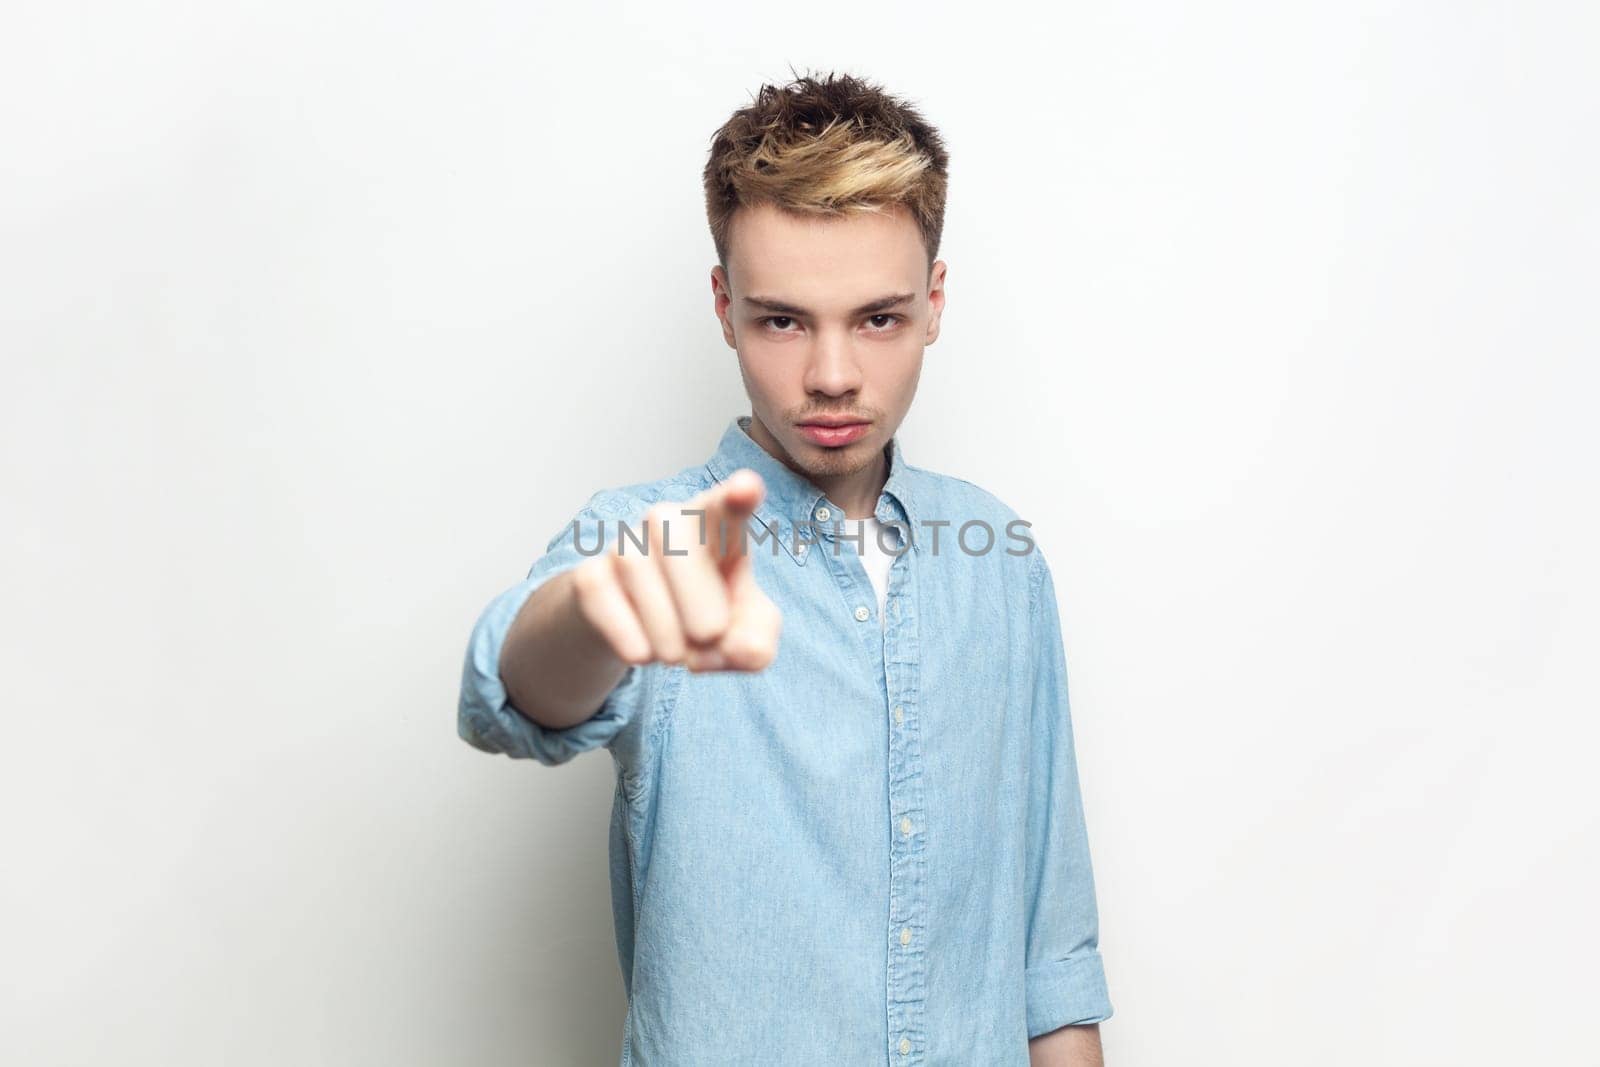 Portrait of bossy strict man wearing denim shirt looking and indicating to camera, choosing you, you have problems, has serious expression. Indoor studio shot isolated on gray background.